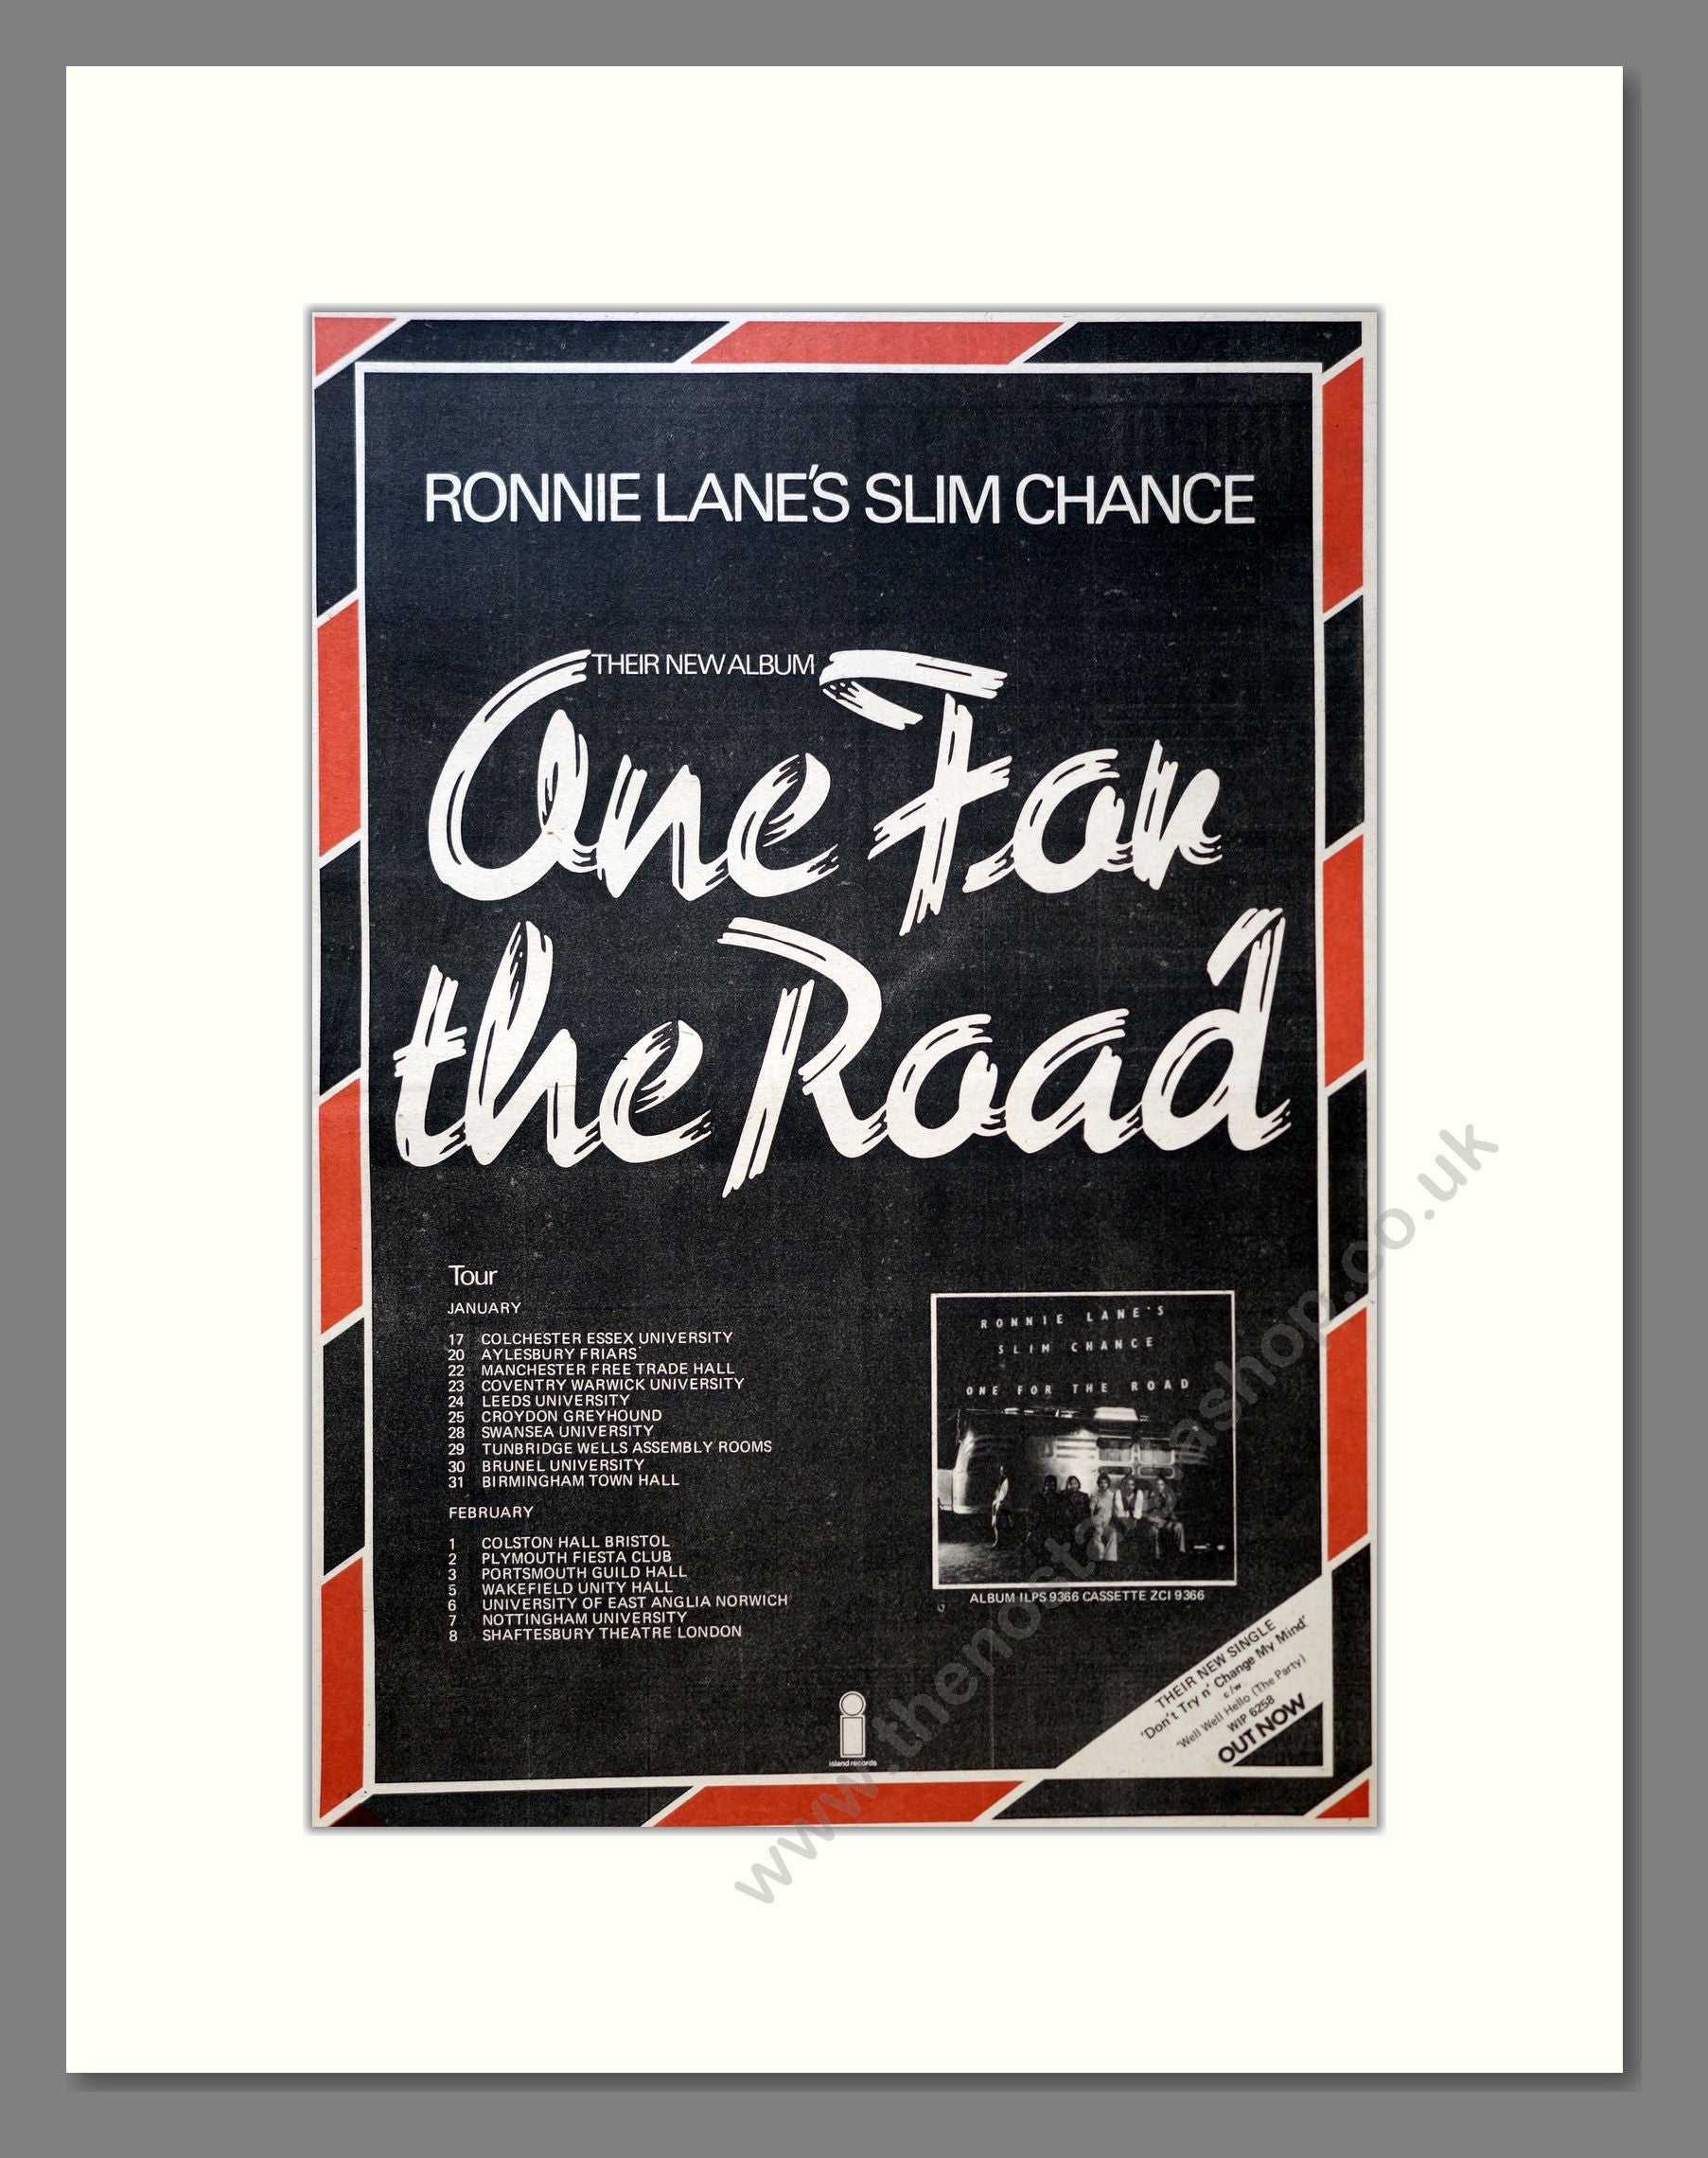 Ronnie Lane's Slim Chance - One For The Road. Vintage Advert 1976 (ref AD18259)